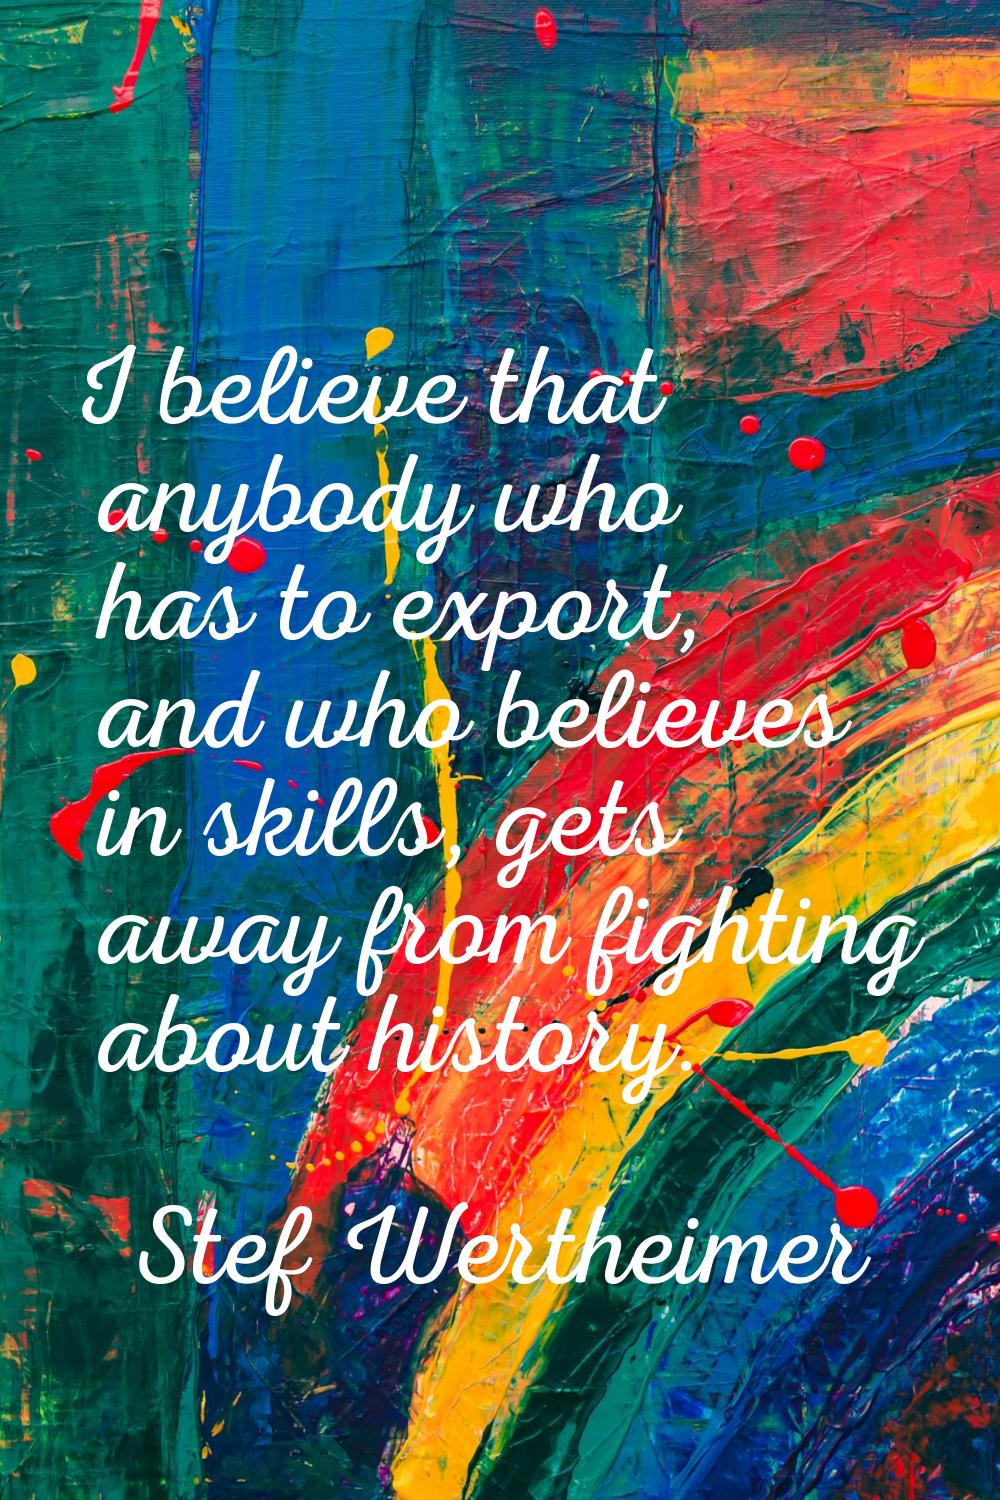 I believe that anybody who has to export, and who believes in skills, gets away from fighting about